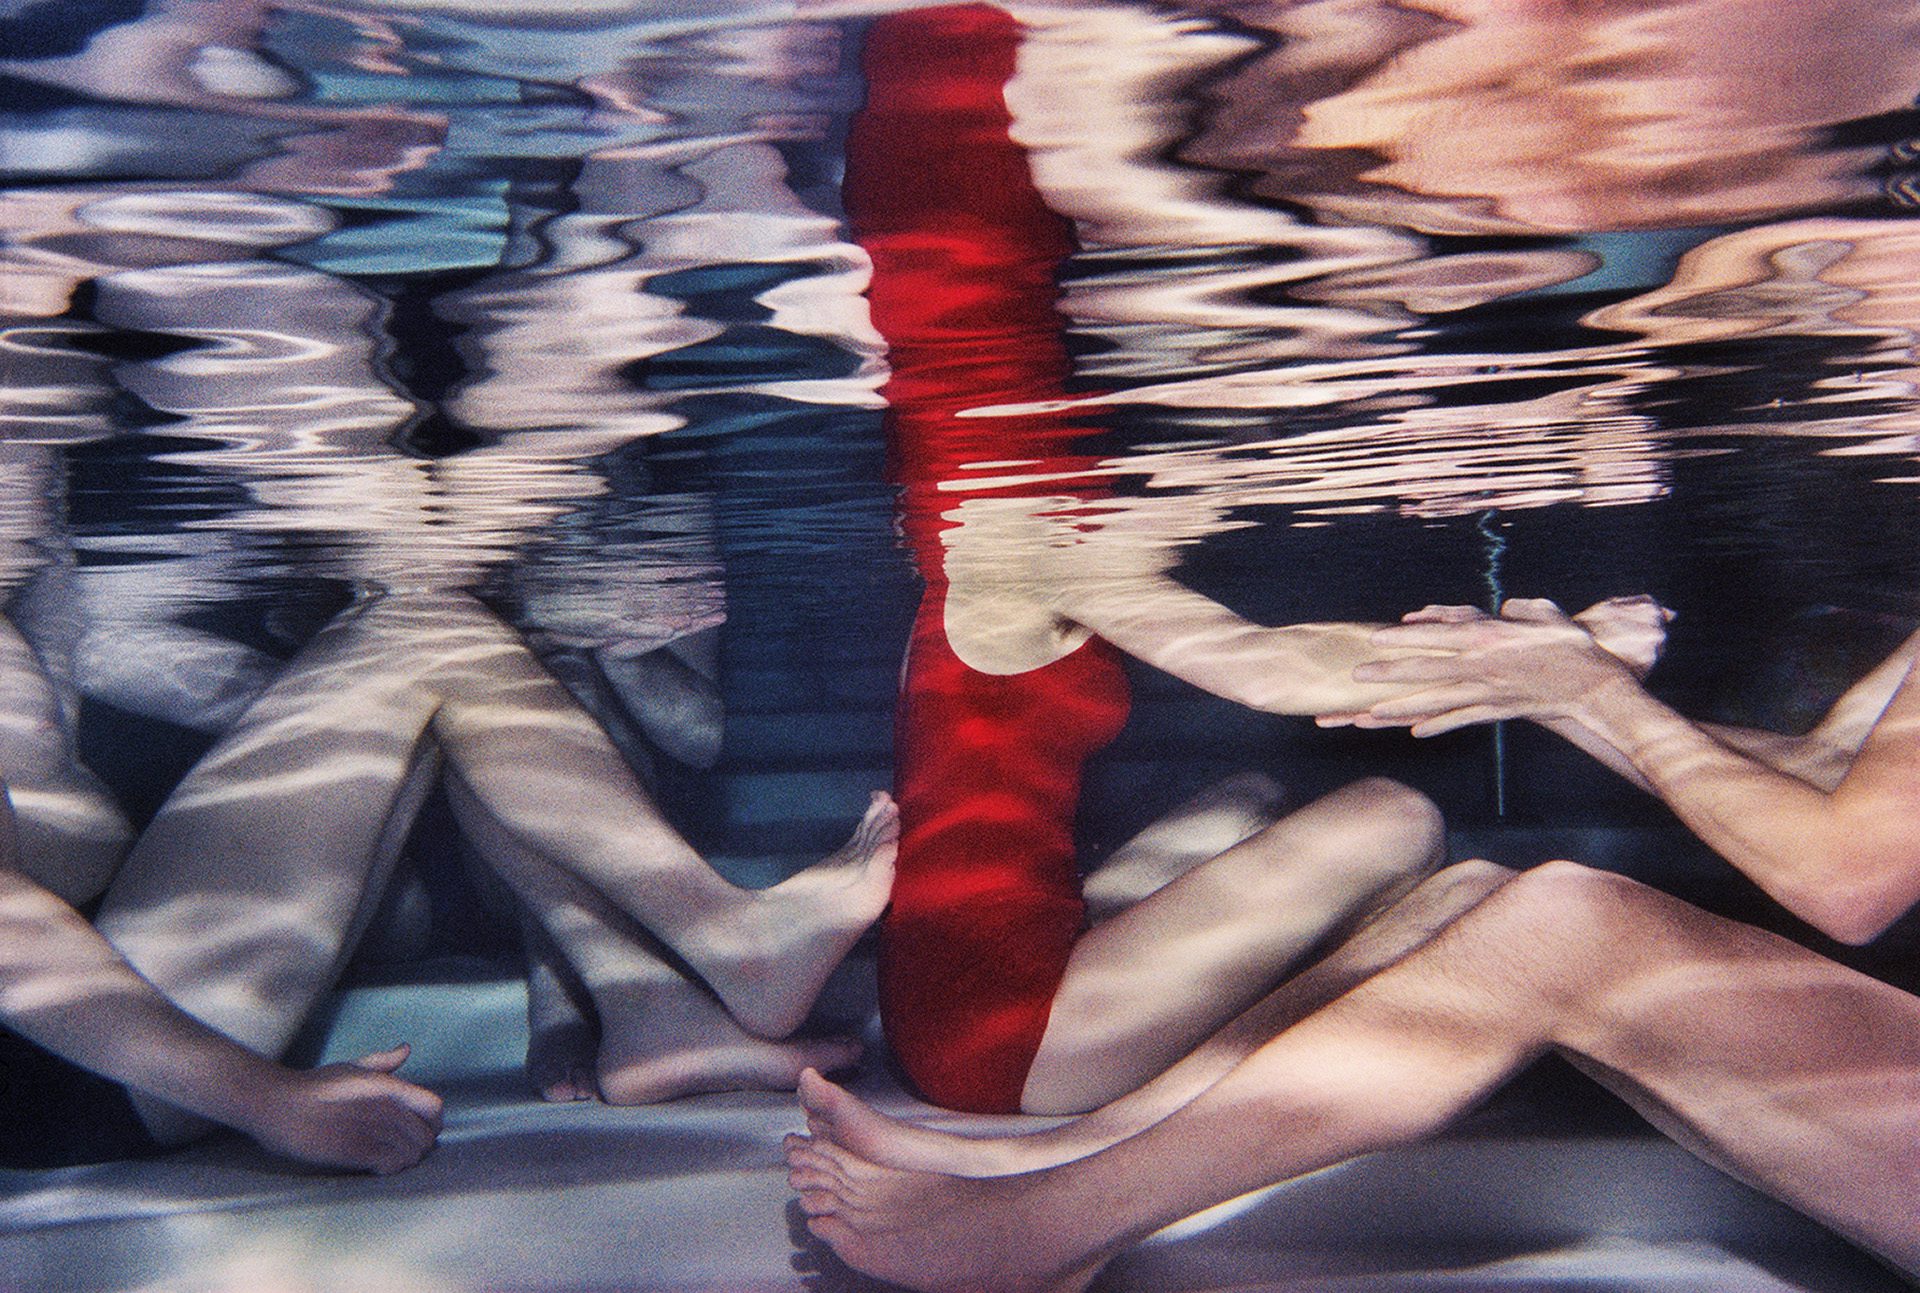 Photograph by Larry Sultan from his series Swimmers showing rows of people sat on the bottom of a swimming pool including a person wearing a bright red swimming costume